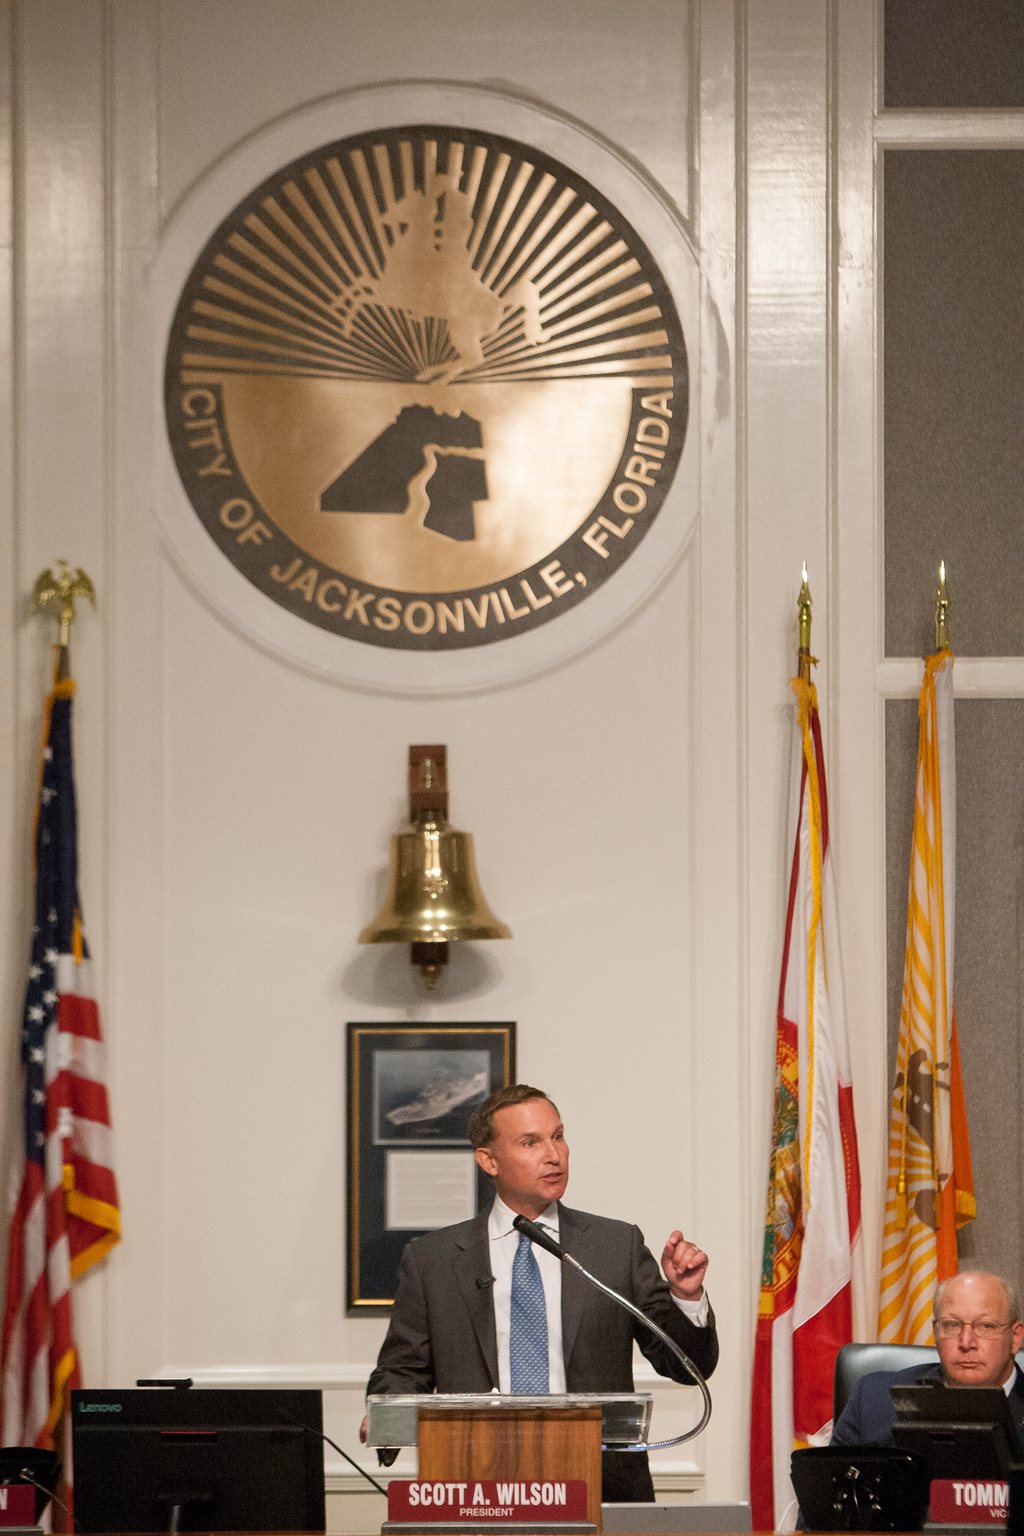 Mayor Lenny Curry presenting his proposed annual budget to City Council on July 15, 2019